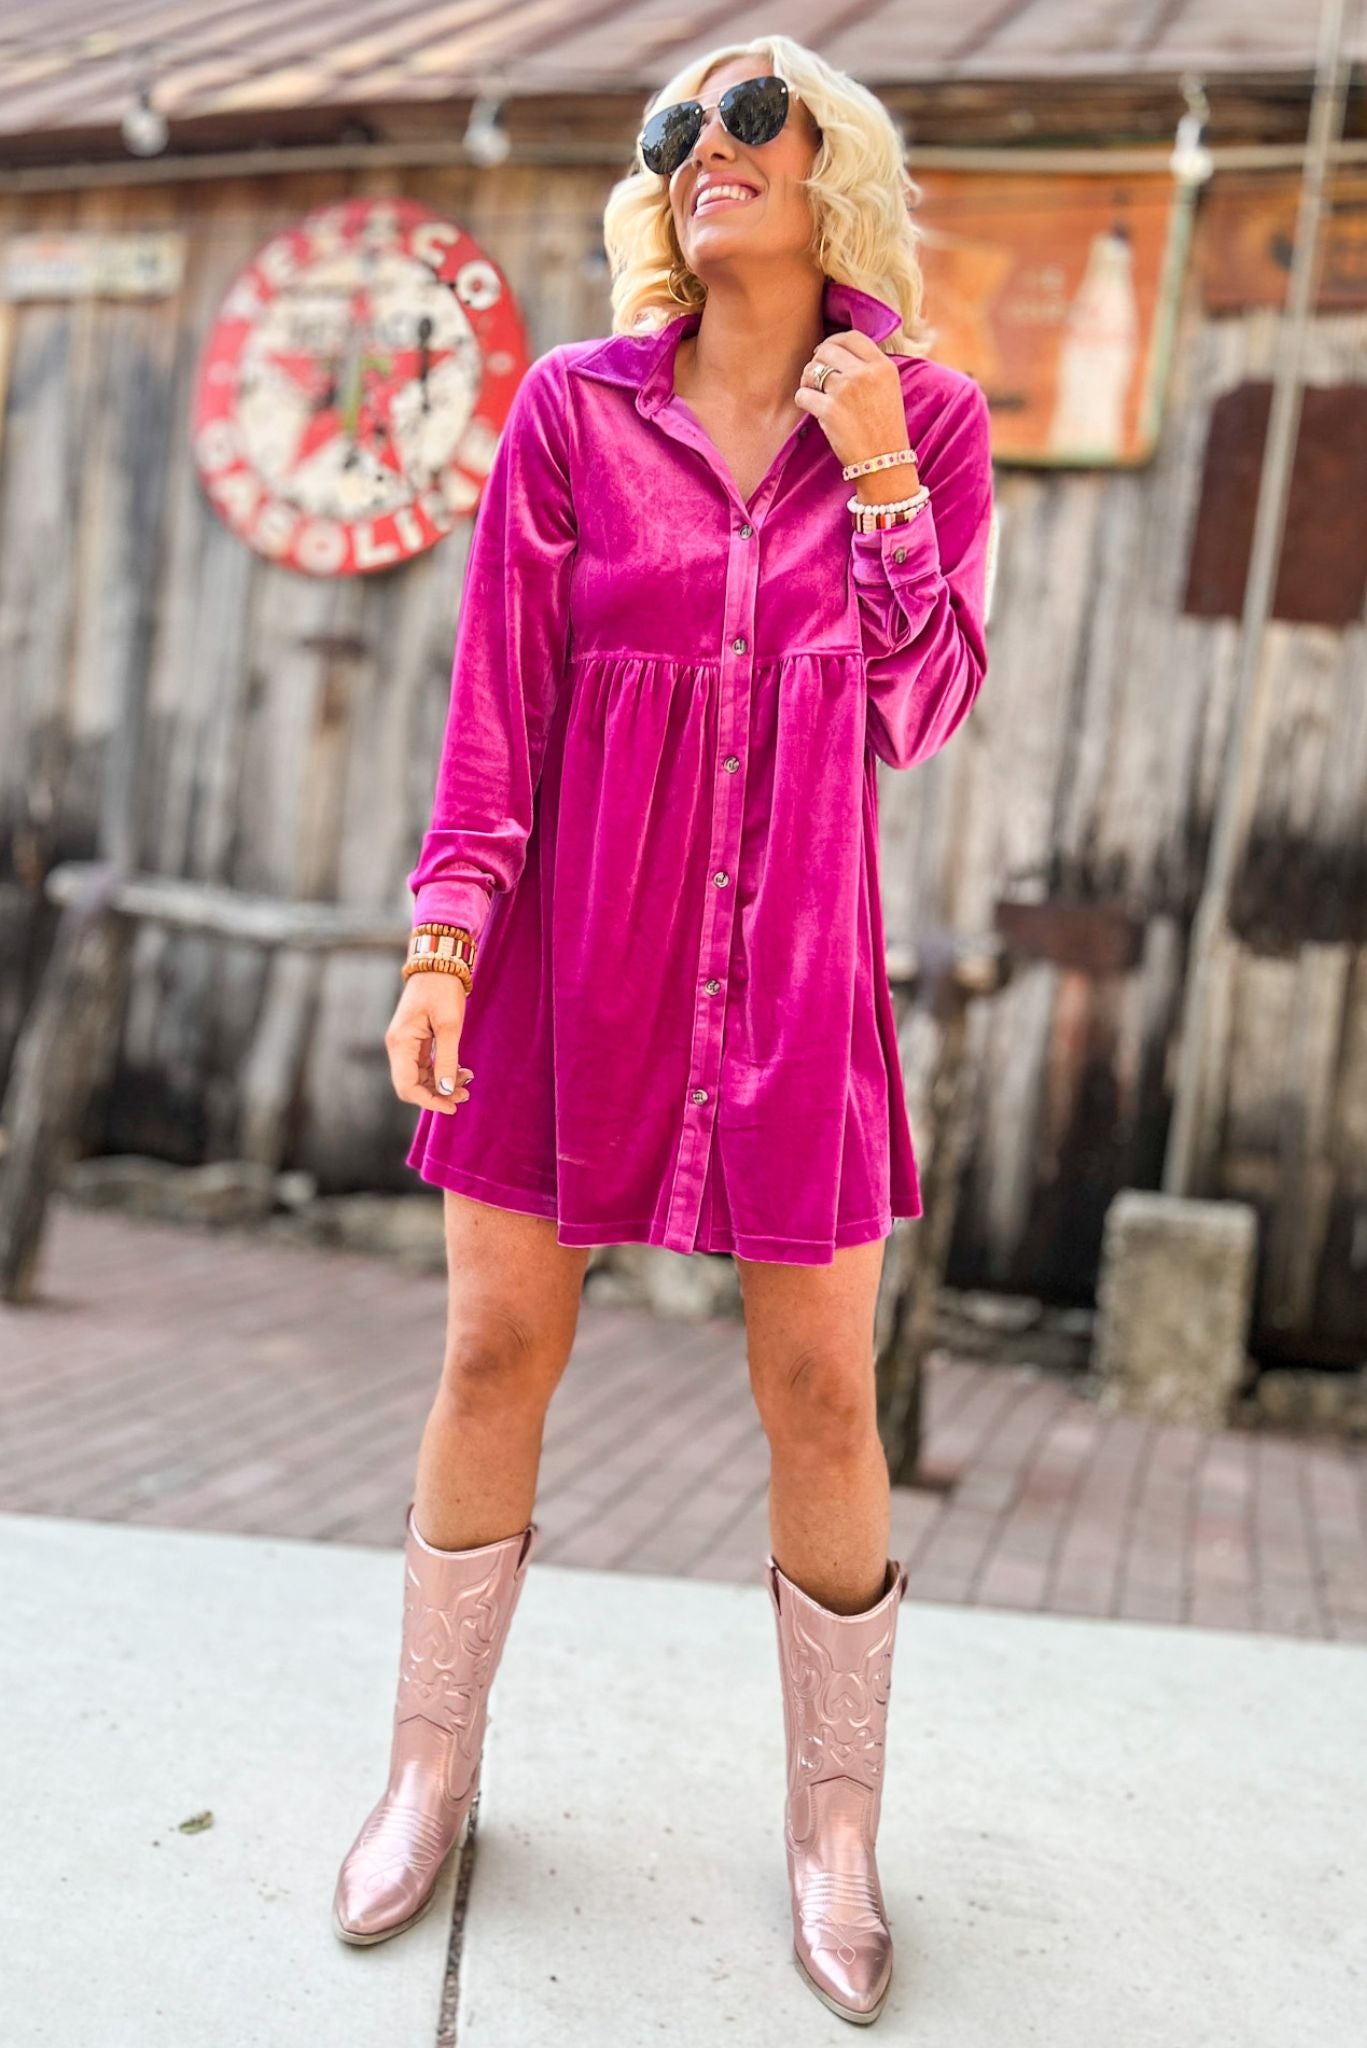 Magenta Velvet Button Up Long Sleeve Babydoll Dress, fall fashion, country concert, concert look, must ave, velvet, shop style your senses by mallory fitzsimmons